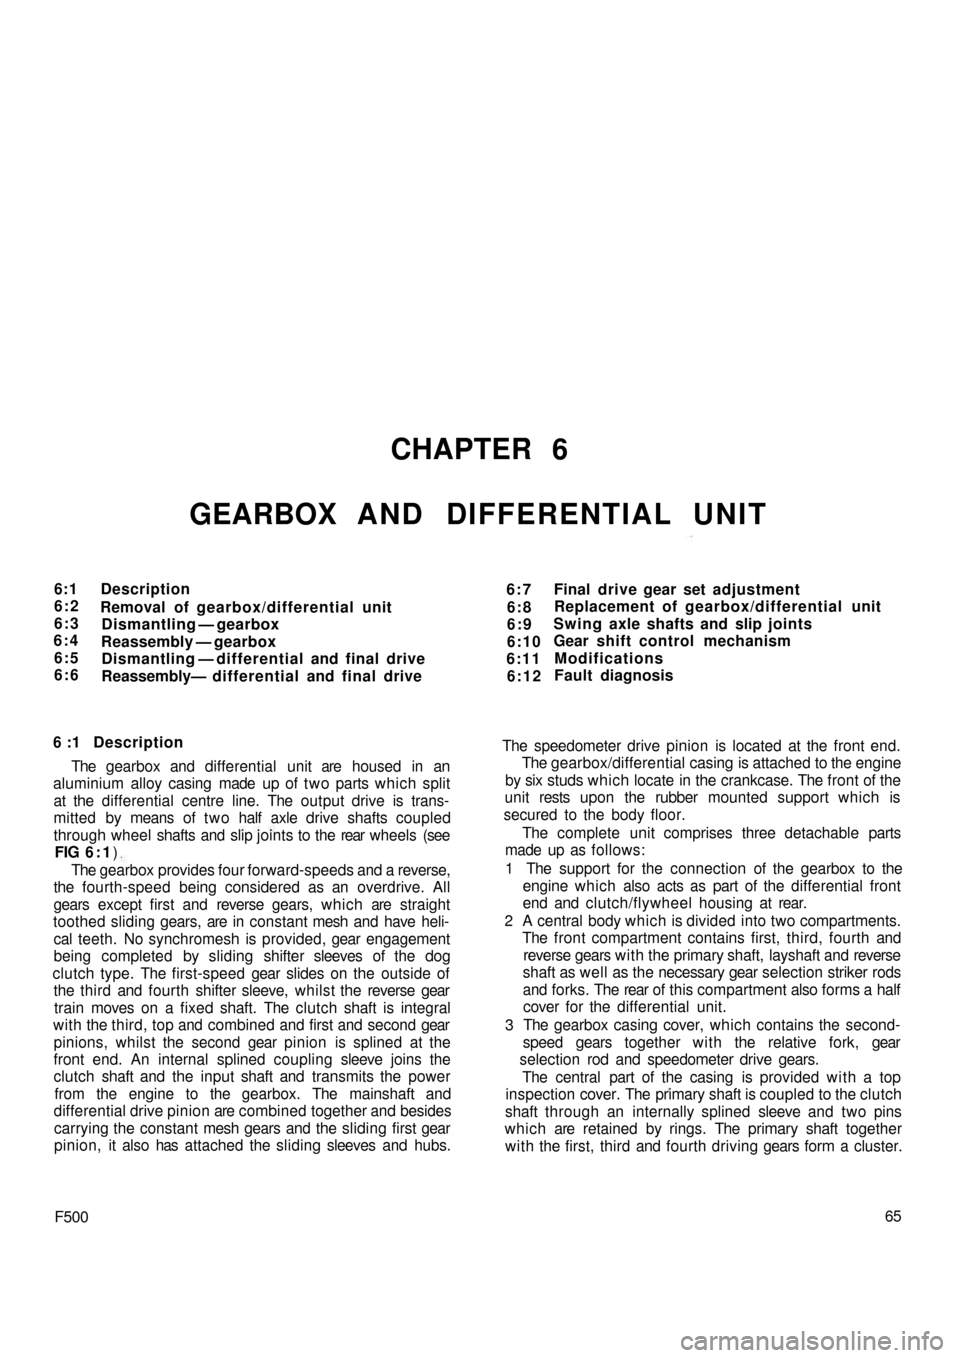 FIAT 500 1969 1.G Repair Manual CHAPTER 6
GEARBOX AND DIFFERENTIAL UNIT
6:1
6:2
6:3
6:4
6:5
6:6Description
Removal of gearbox/differential unit
Dismantling — gearbox
Reassembly — gearbox
Dismantling — differential and final dr